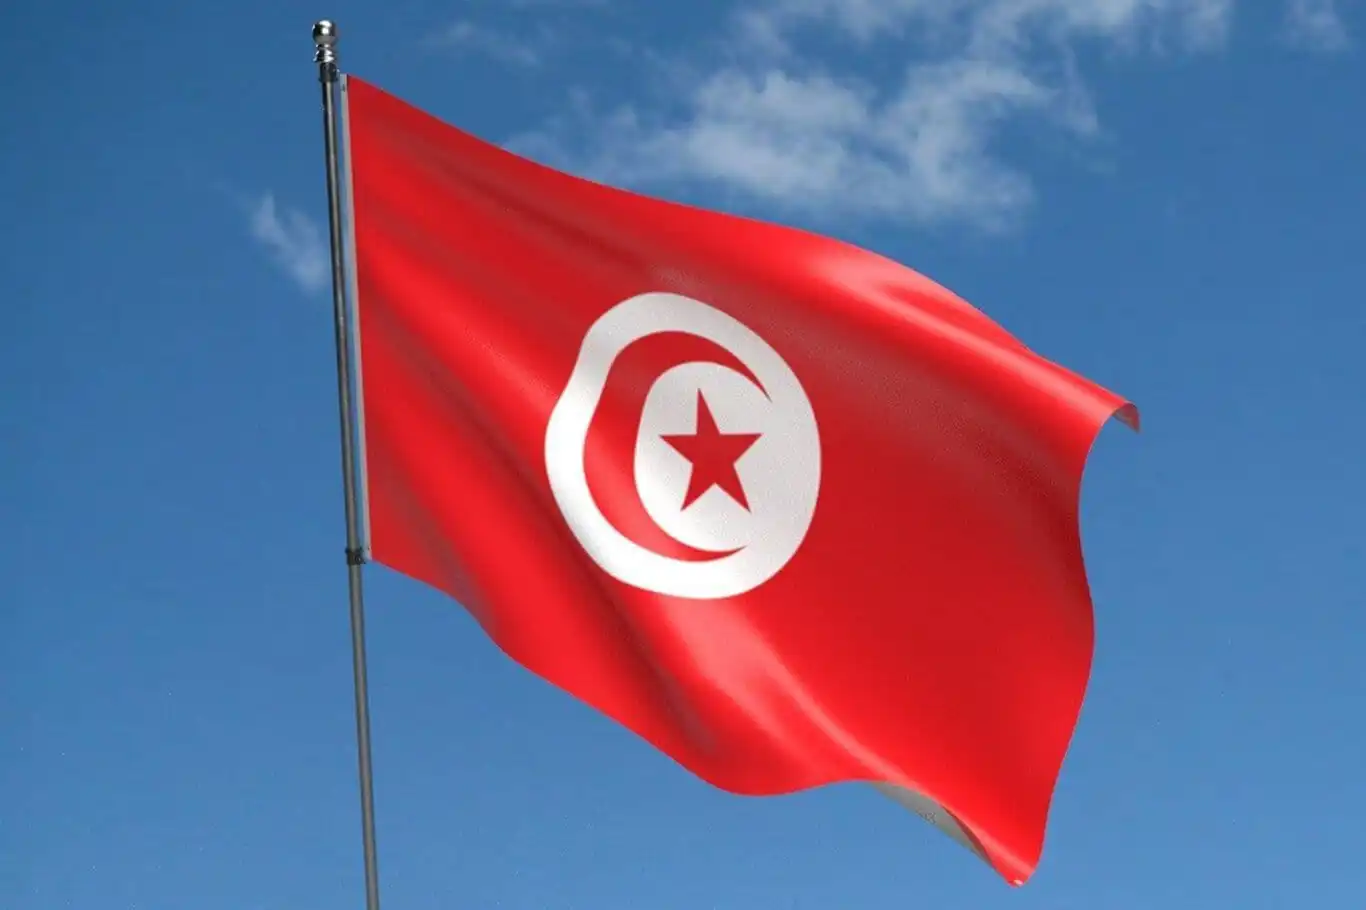 Rights Groups: Freedoms in Tunisia under threat